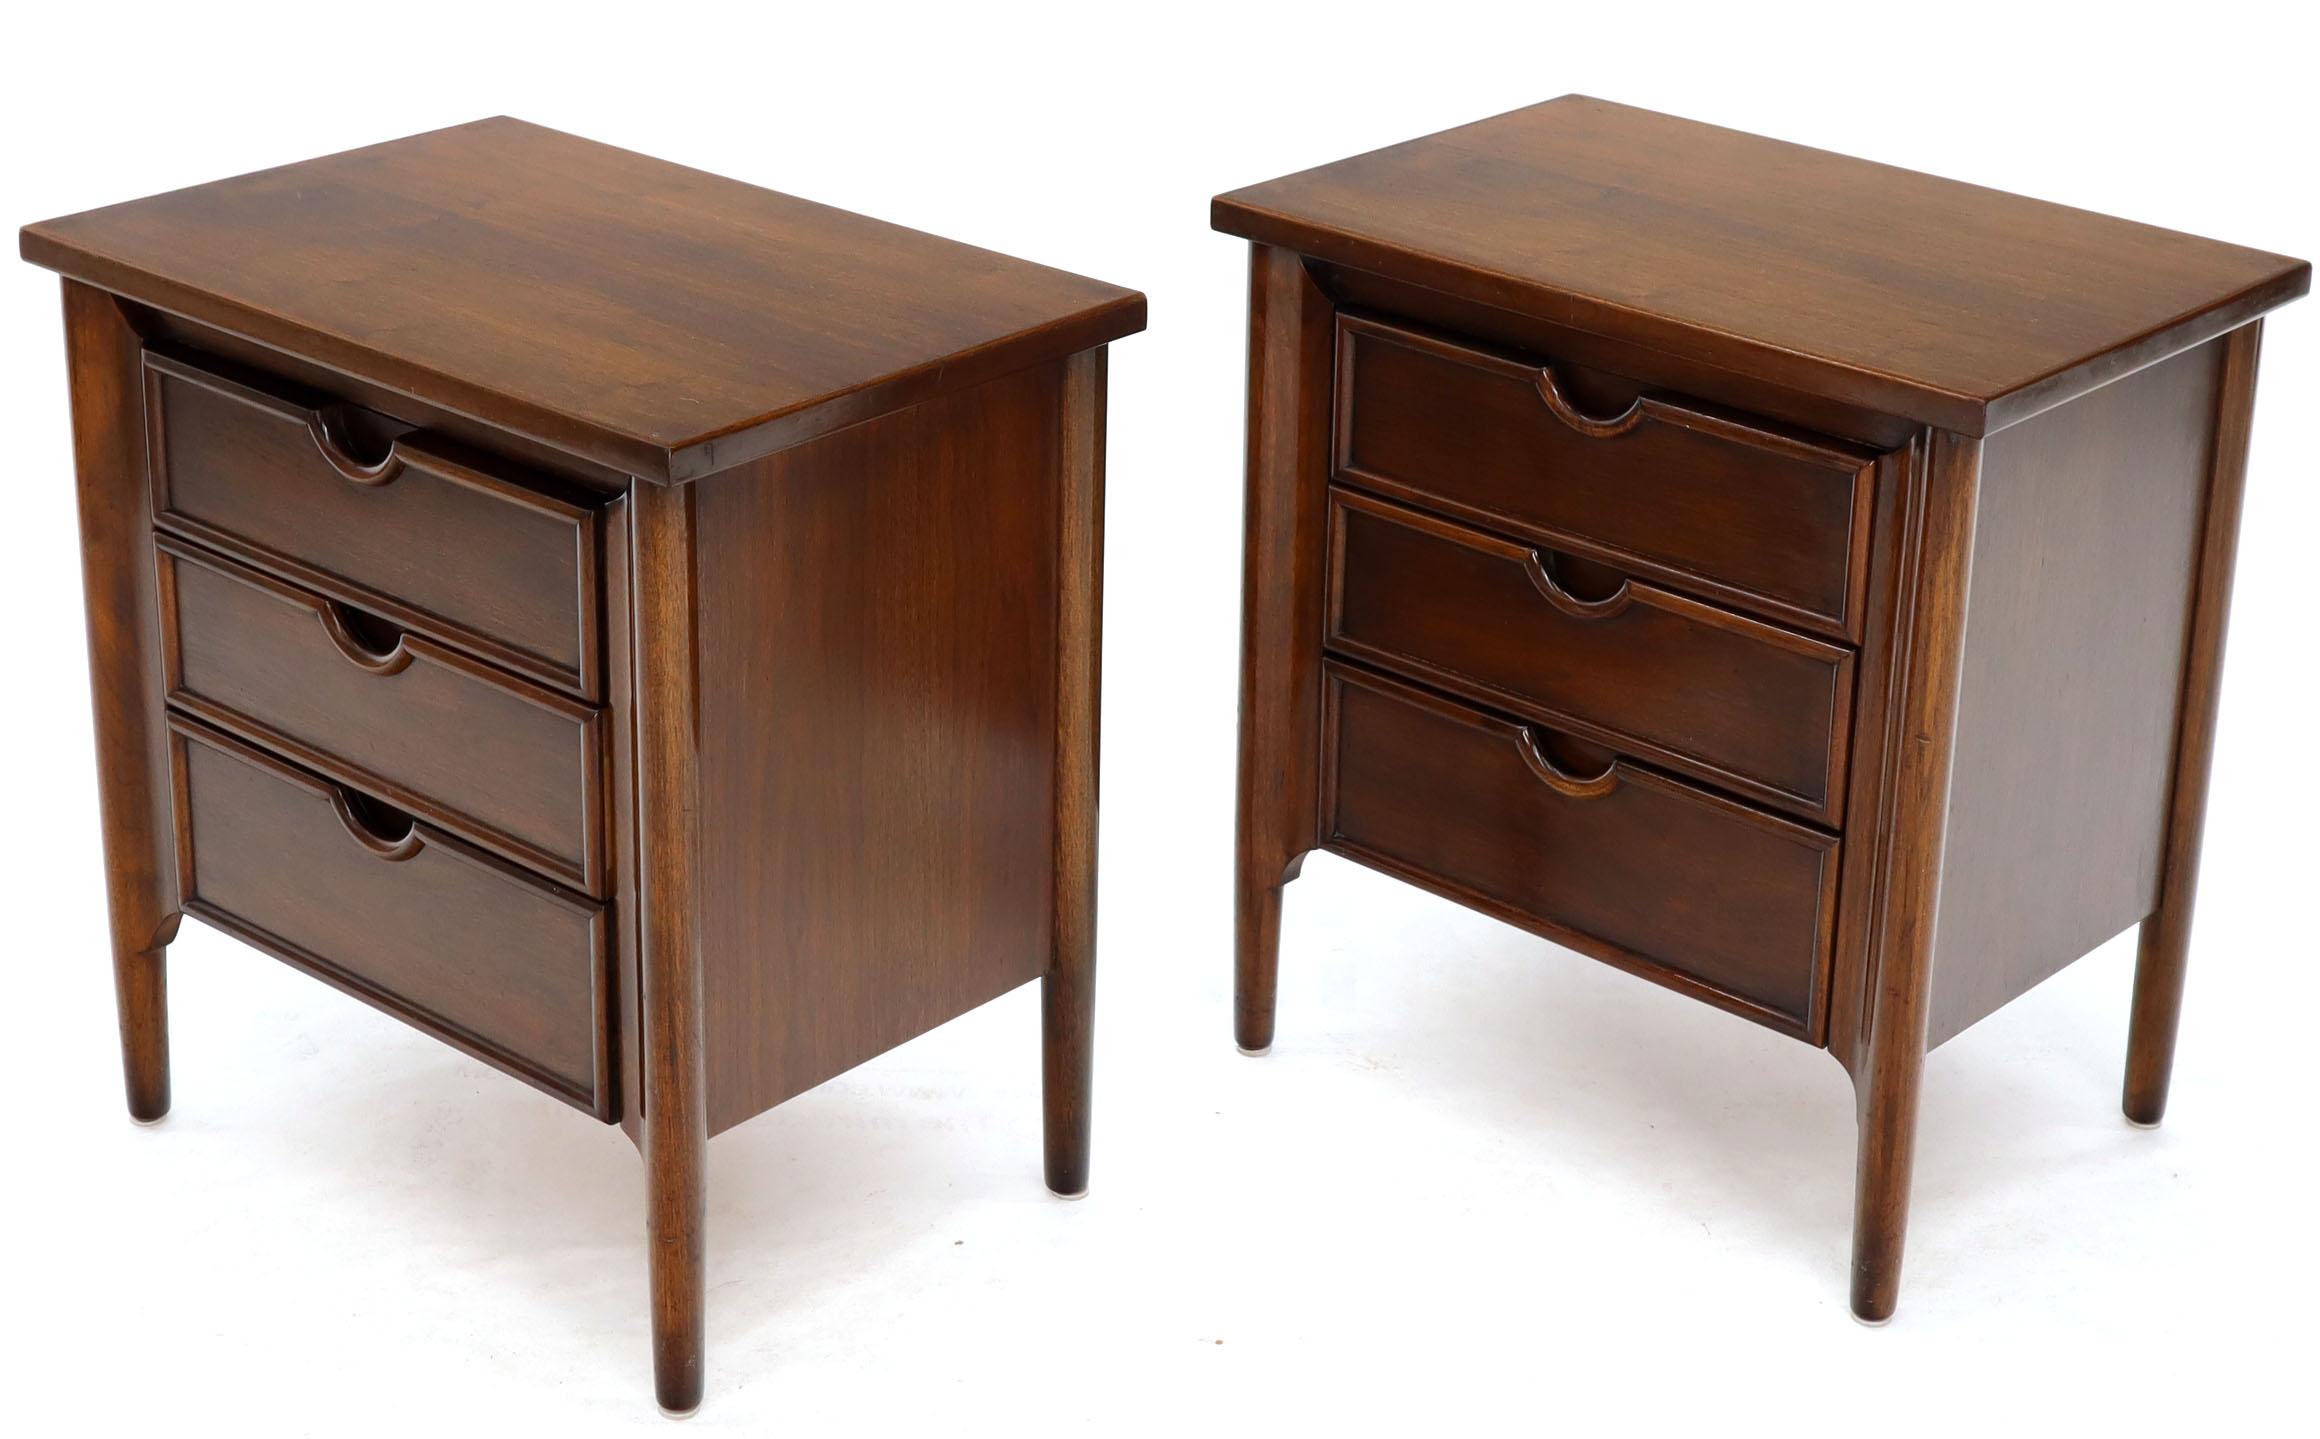 American Pair of Exposed Sculptural Legs Three Drawers Nightstands End Tables Stands For Sale